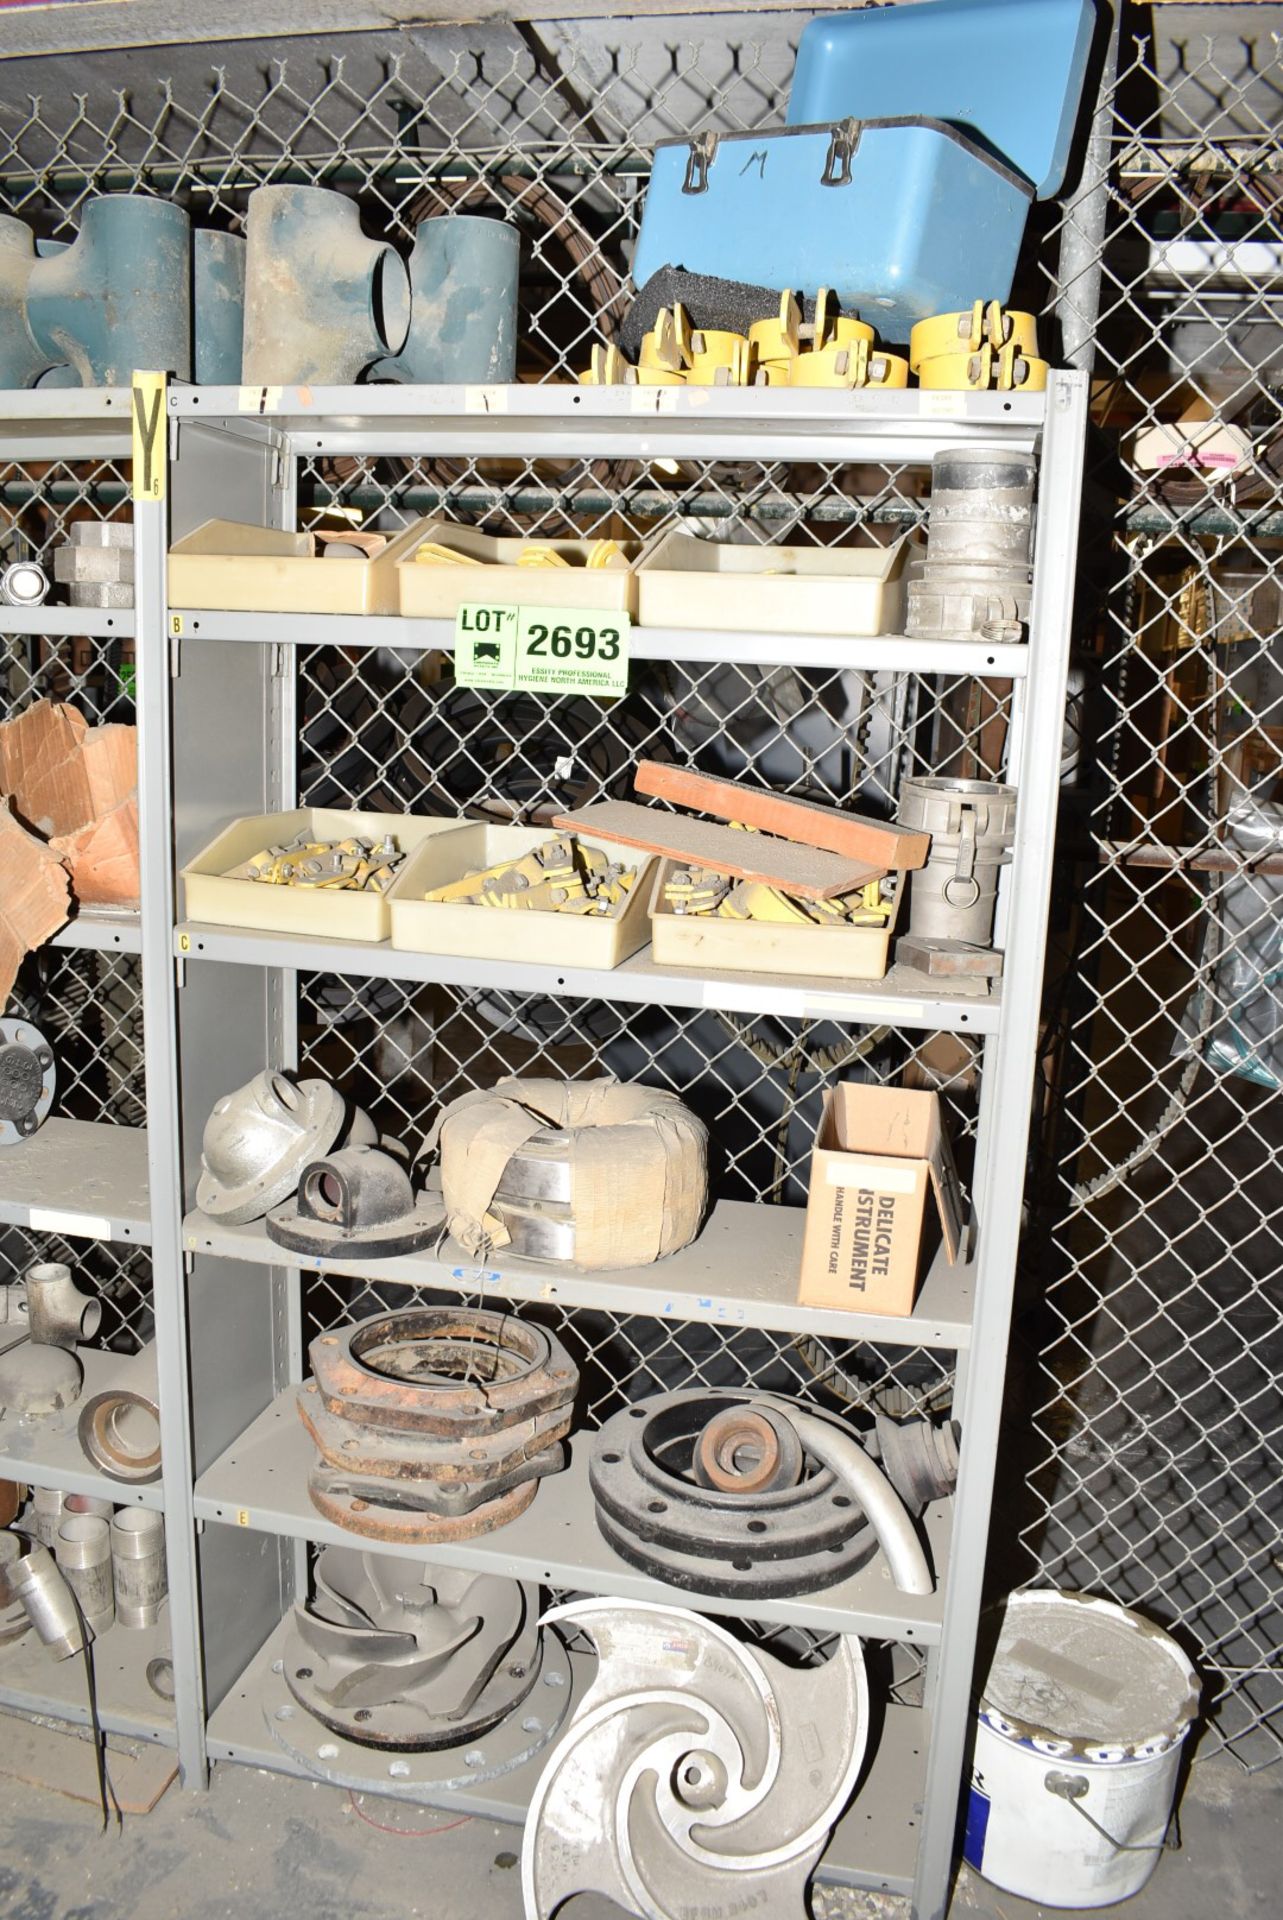 LOT/ CONTENTS OF SHELF - INCLUDING COUPLINGS, FLANGES, IMPELLERS, SPARE PARTS [RIGGING FEES FOR